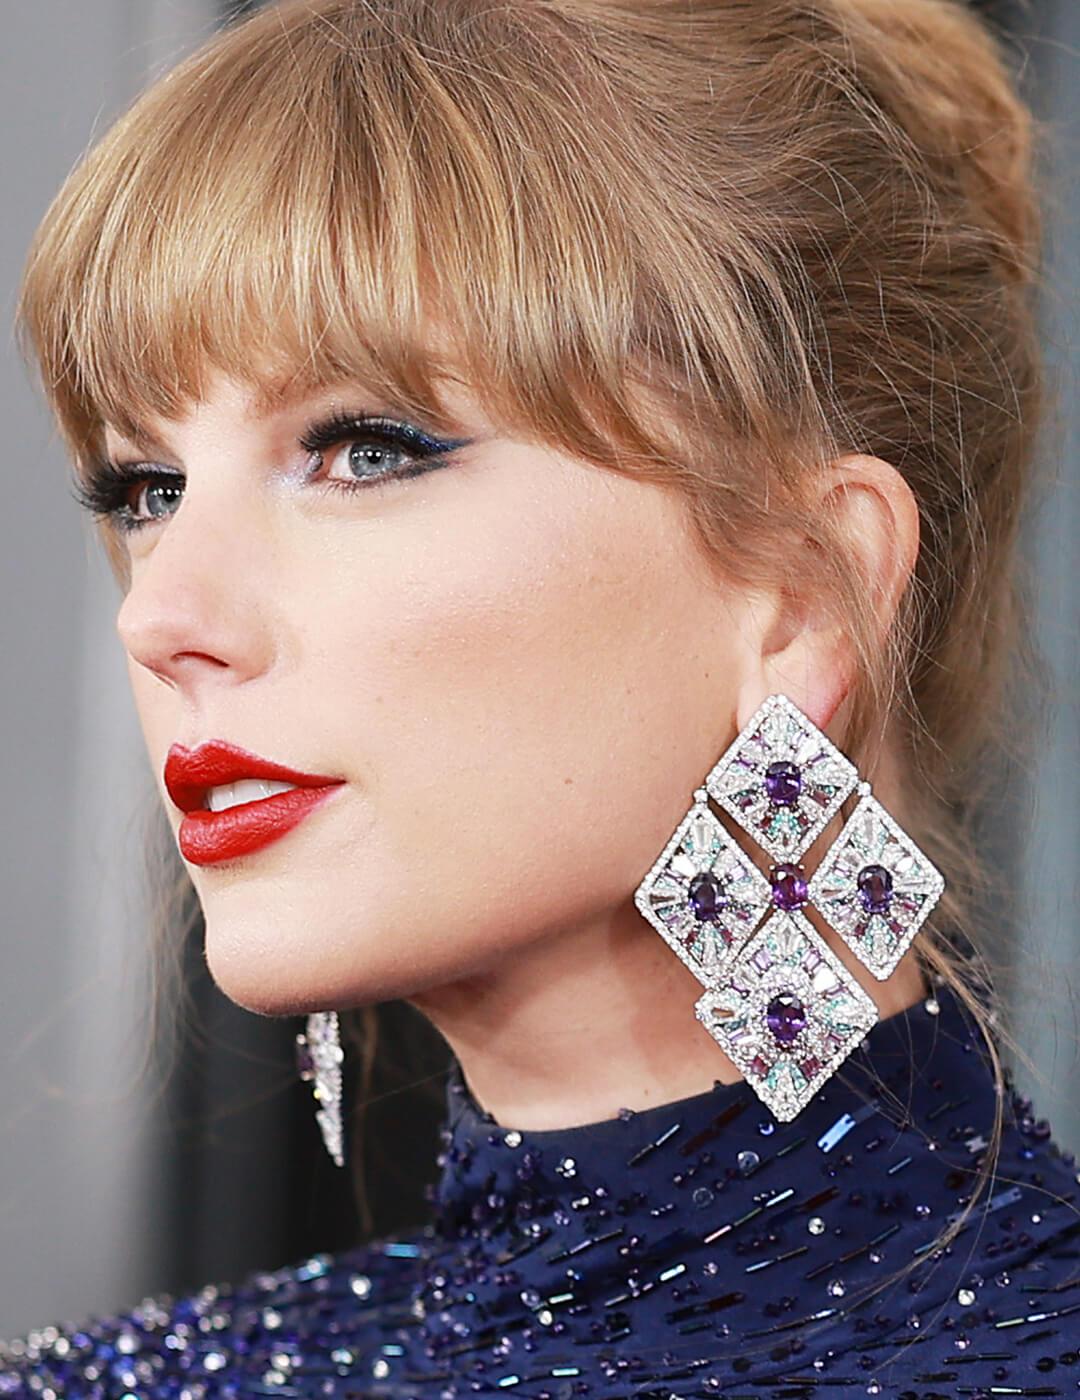 Taylor Swift attends the 65th GRAMMY Awards on February 05, 2023 in Los Angeles, California